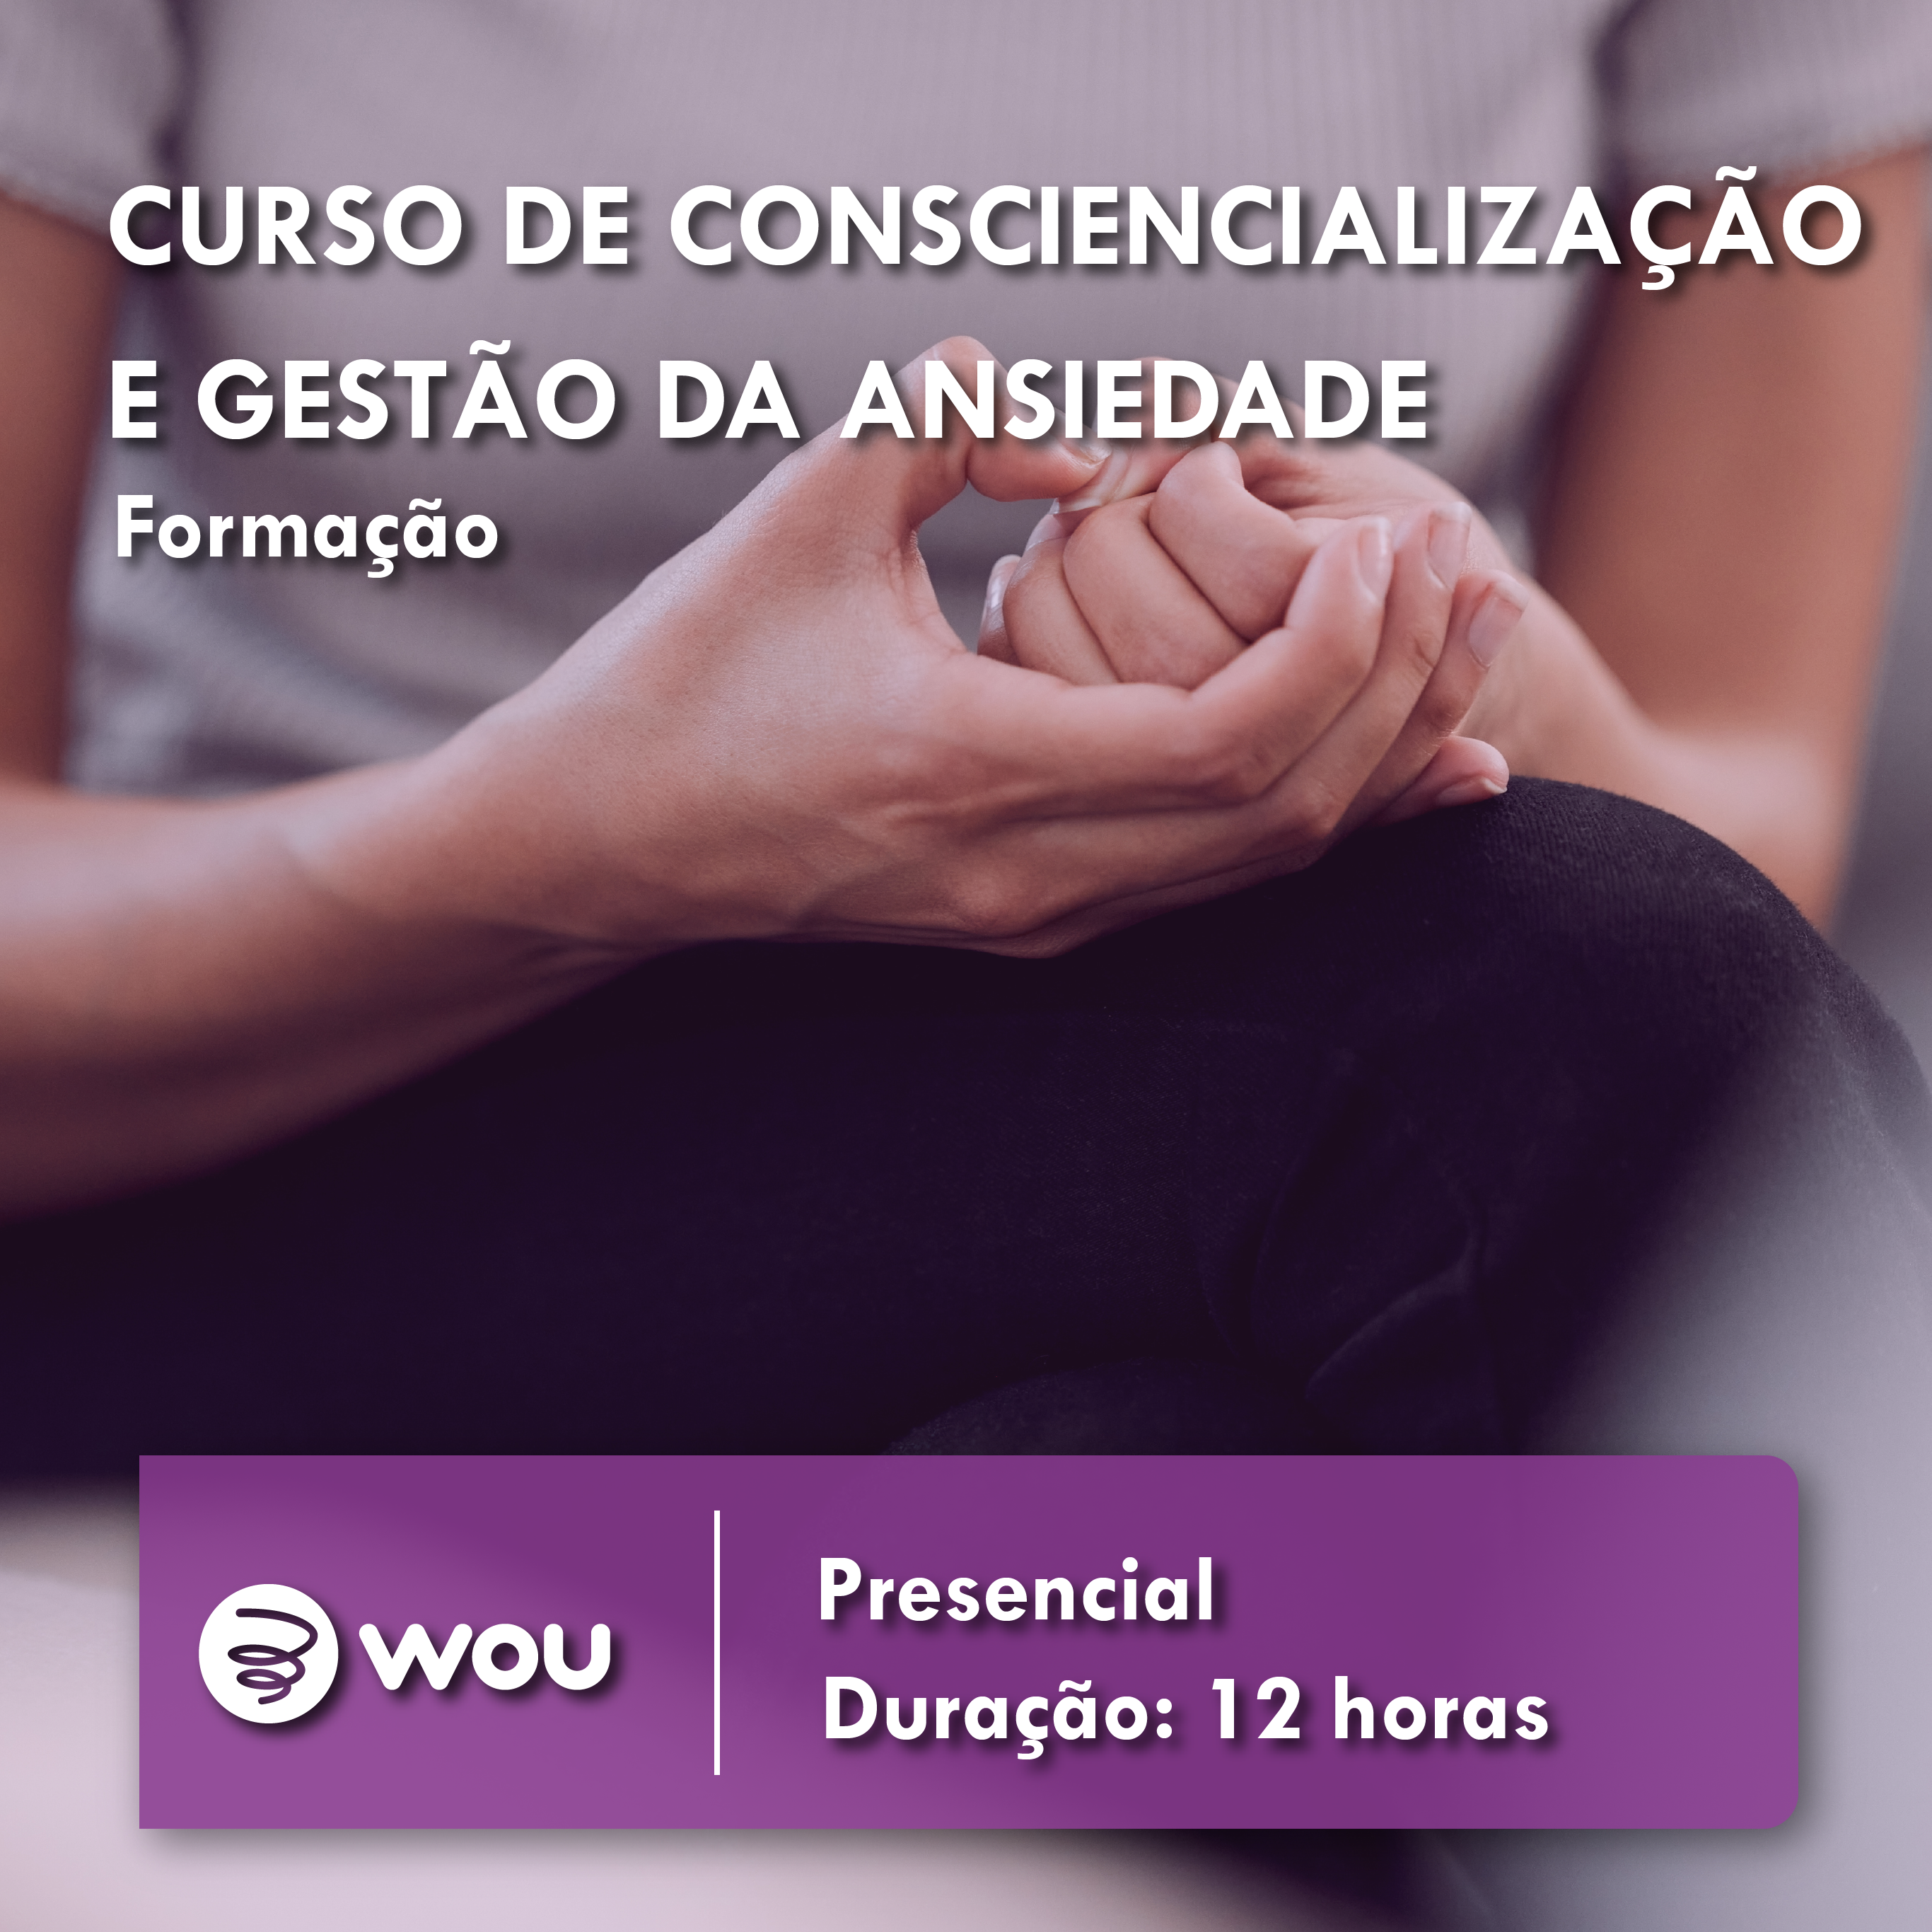 Course on Anxiety Awareness and Management in Porto